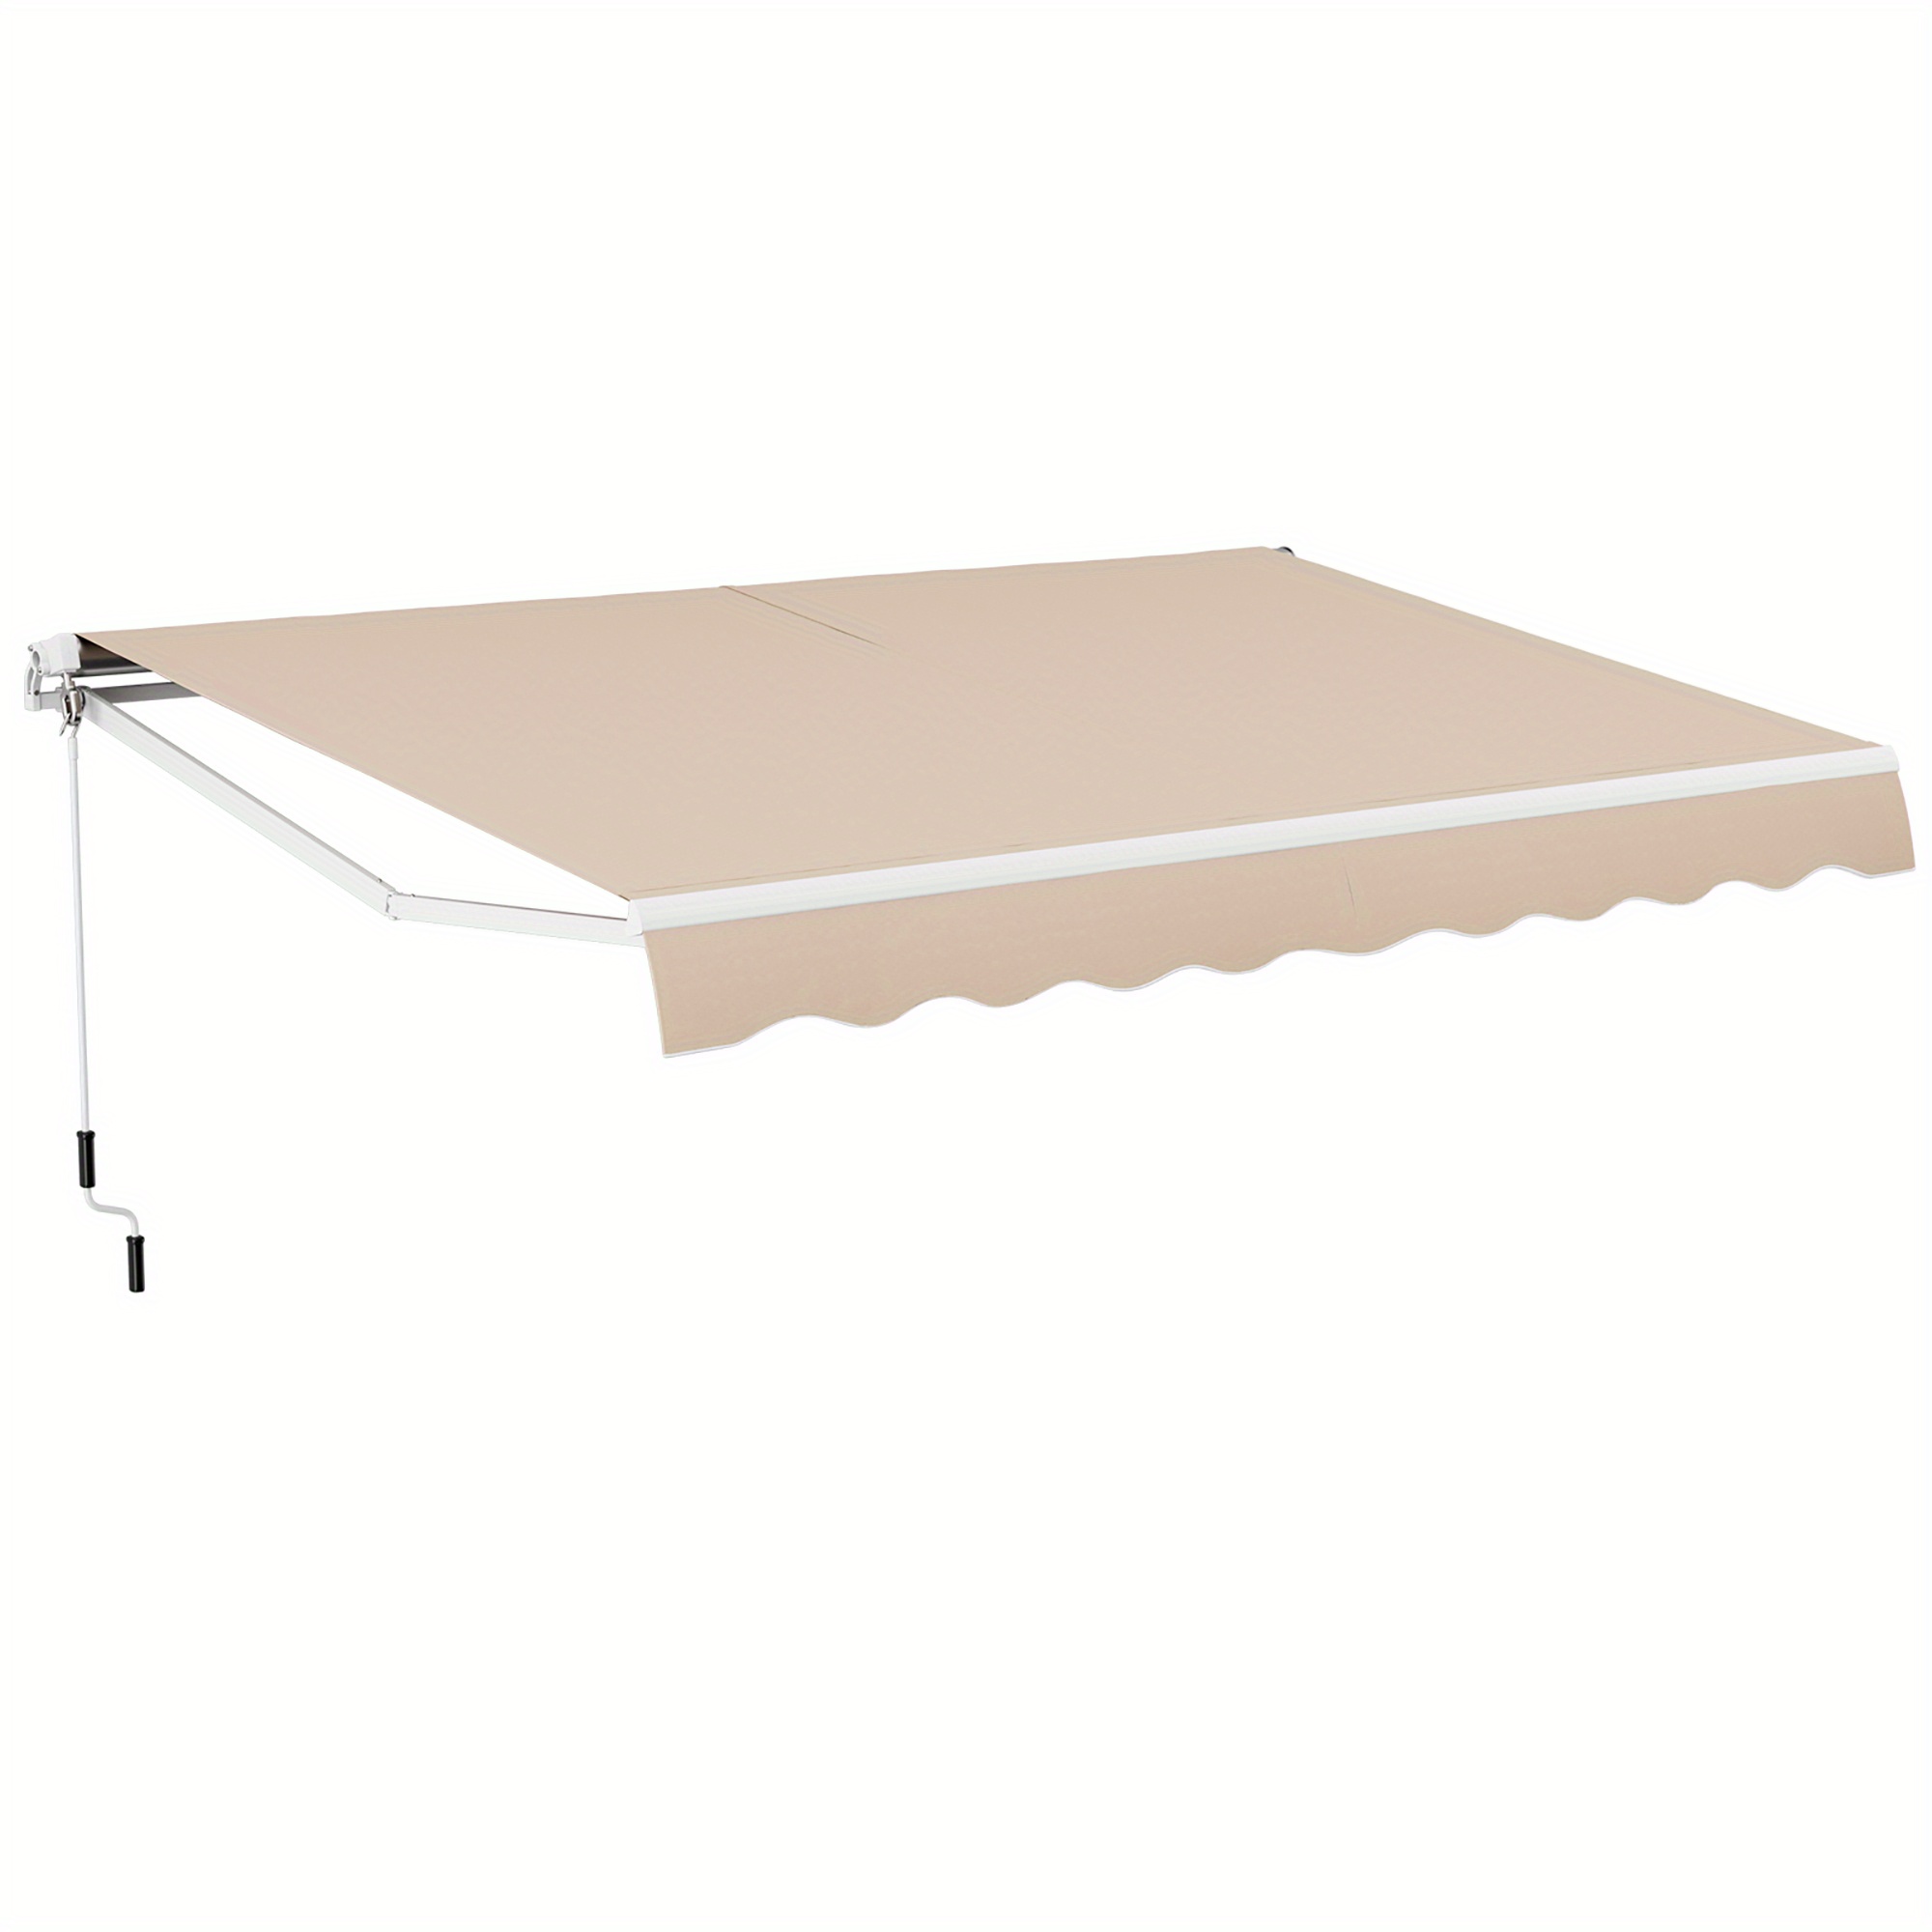 

13 X 8.2 Ft Outdoor Patio Retractable Awning Polyester Sunshade Cover W/ Manual Crank Handle Deck Beige